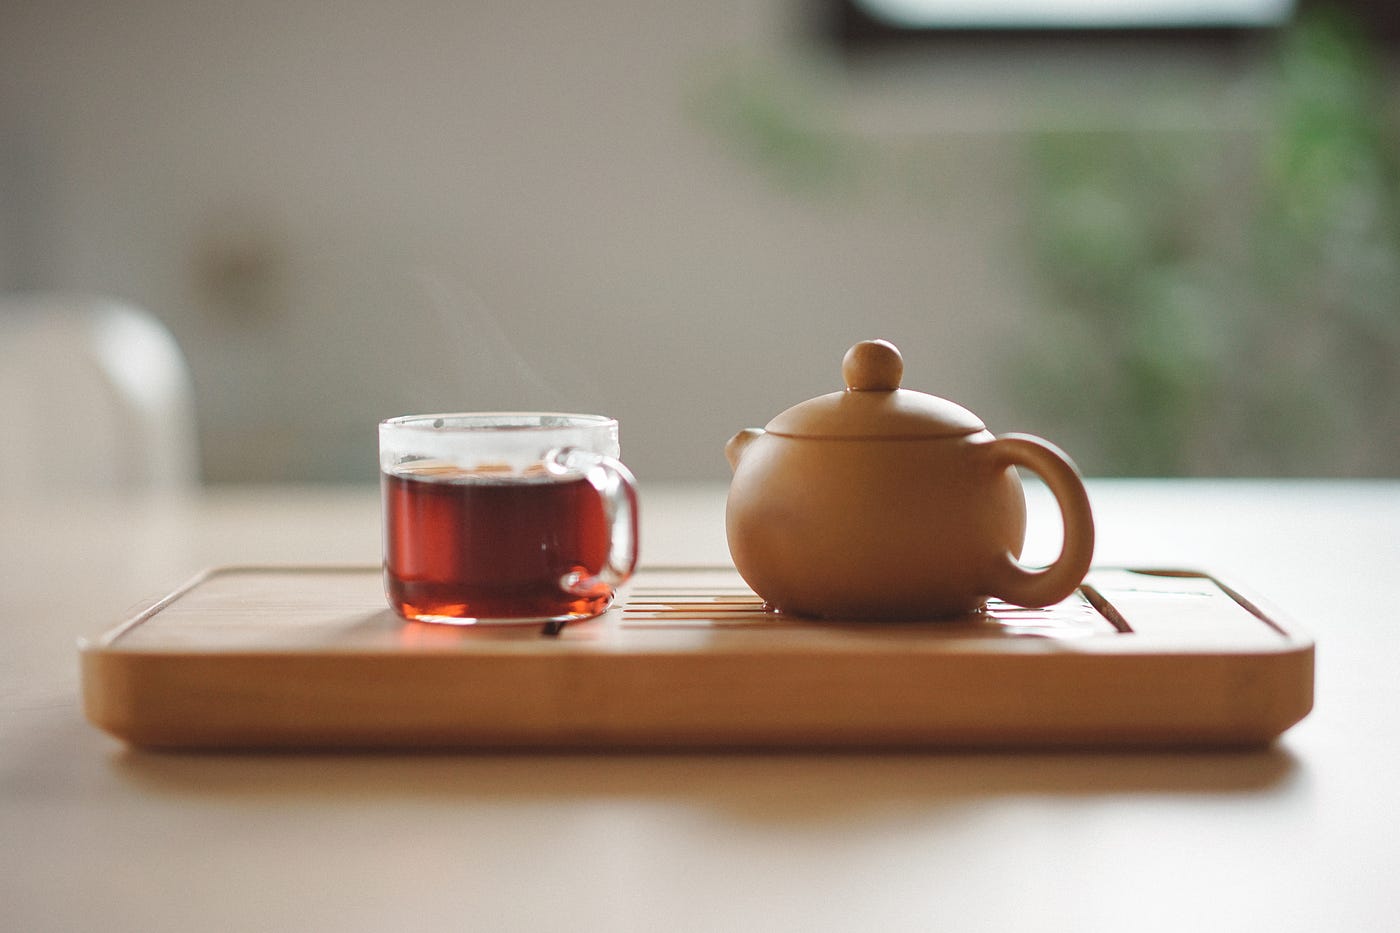 Scientists reveal secret to making perfect cup of tea as